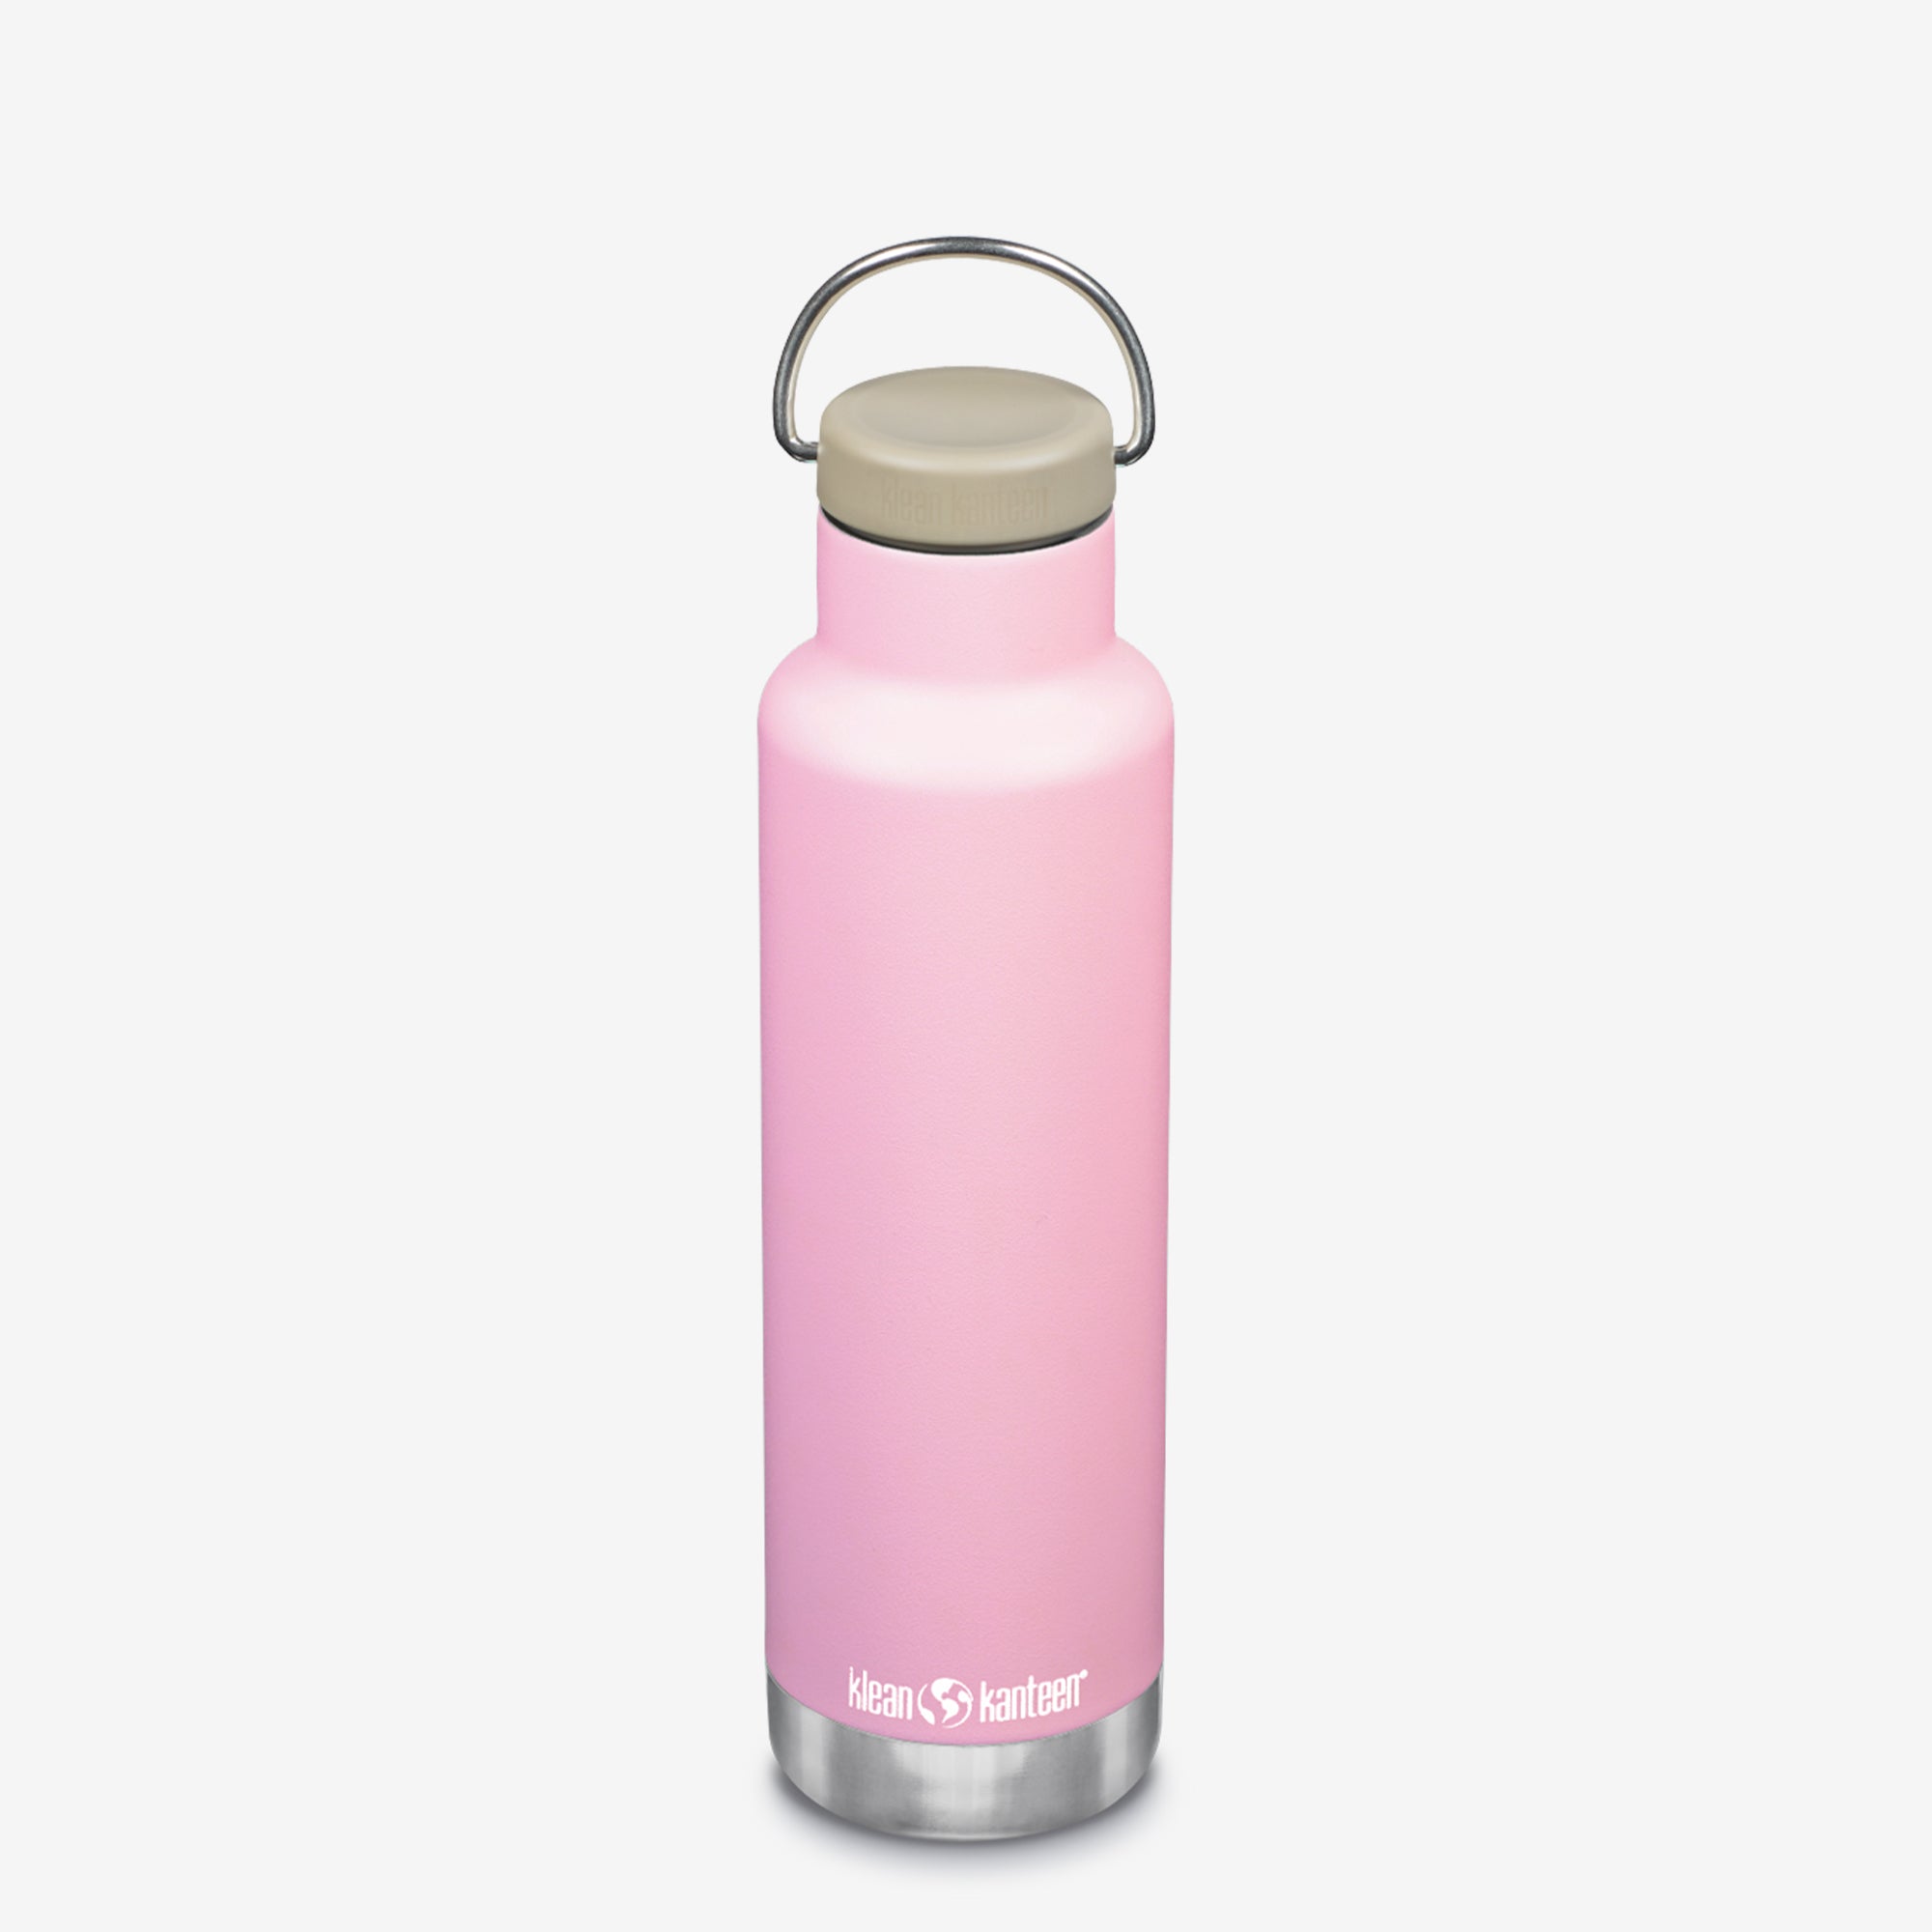 Klean Kanteen 20 oz Classic Insulated Water Bottle with Loop Cap